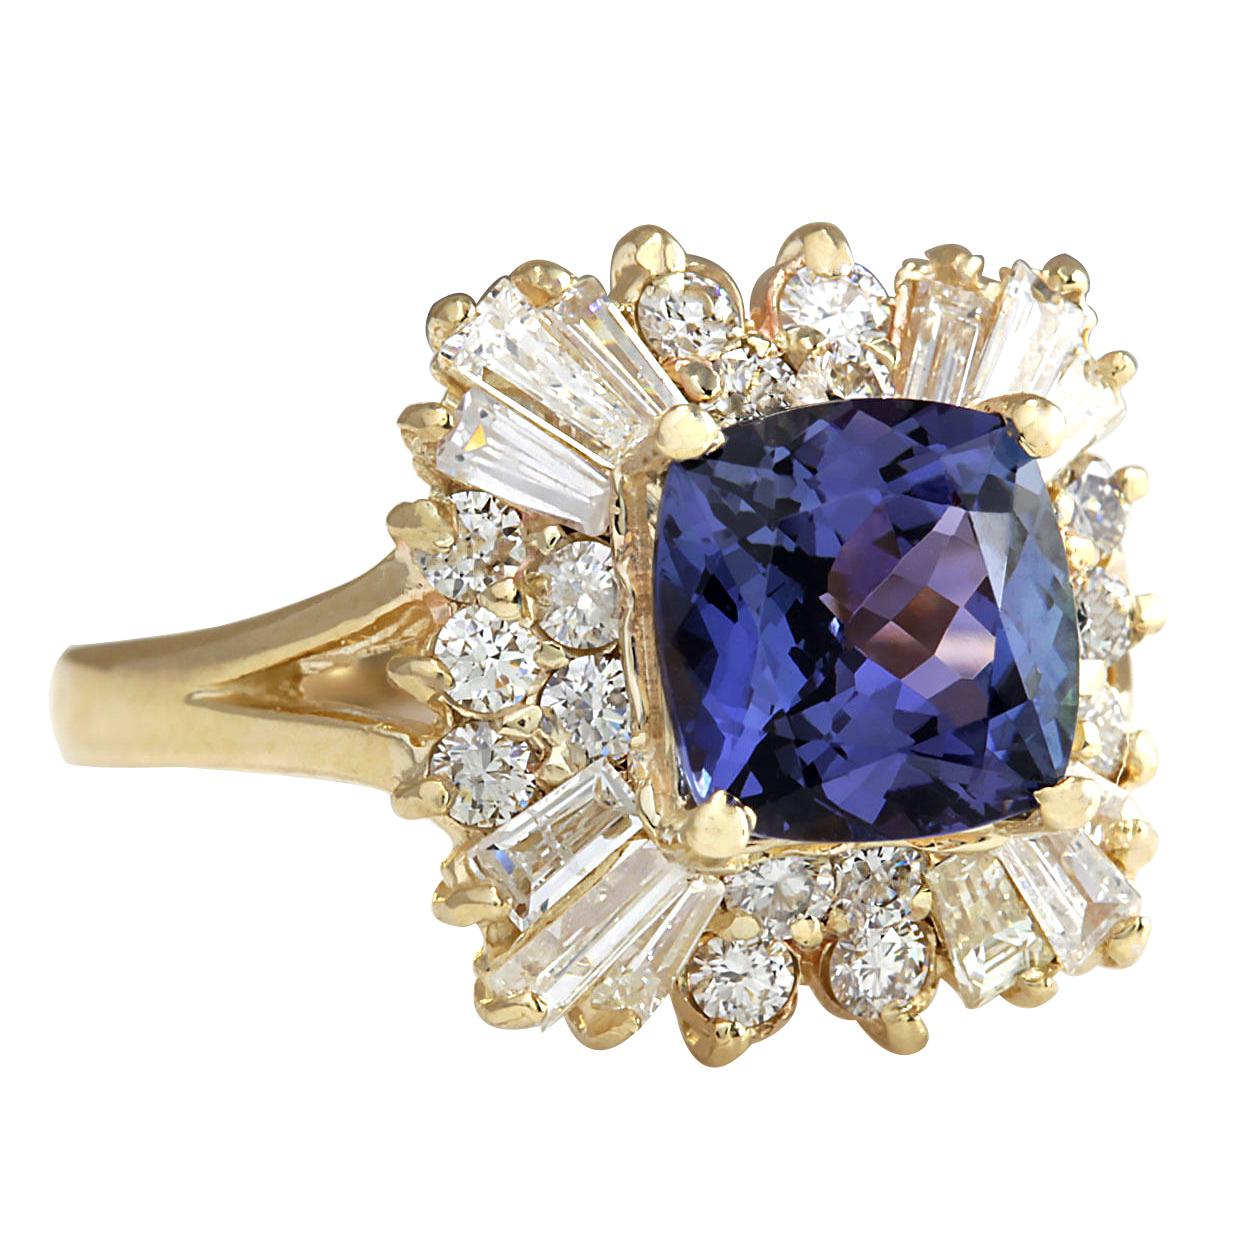 3.44 Carat Natural Tanzanite 14 Karat Yellow Gold Diamond Ring
Stamped: 14K Yellow Gold
Total Ring Weight: 5.2 Grams
Total Natural Tanzanite Weight is 2.18 Carat (Measures: 7.50x7.50 mm)
Color: Blue
Total Natural Diamond Weight is 1.26 Carat
Color: